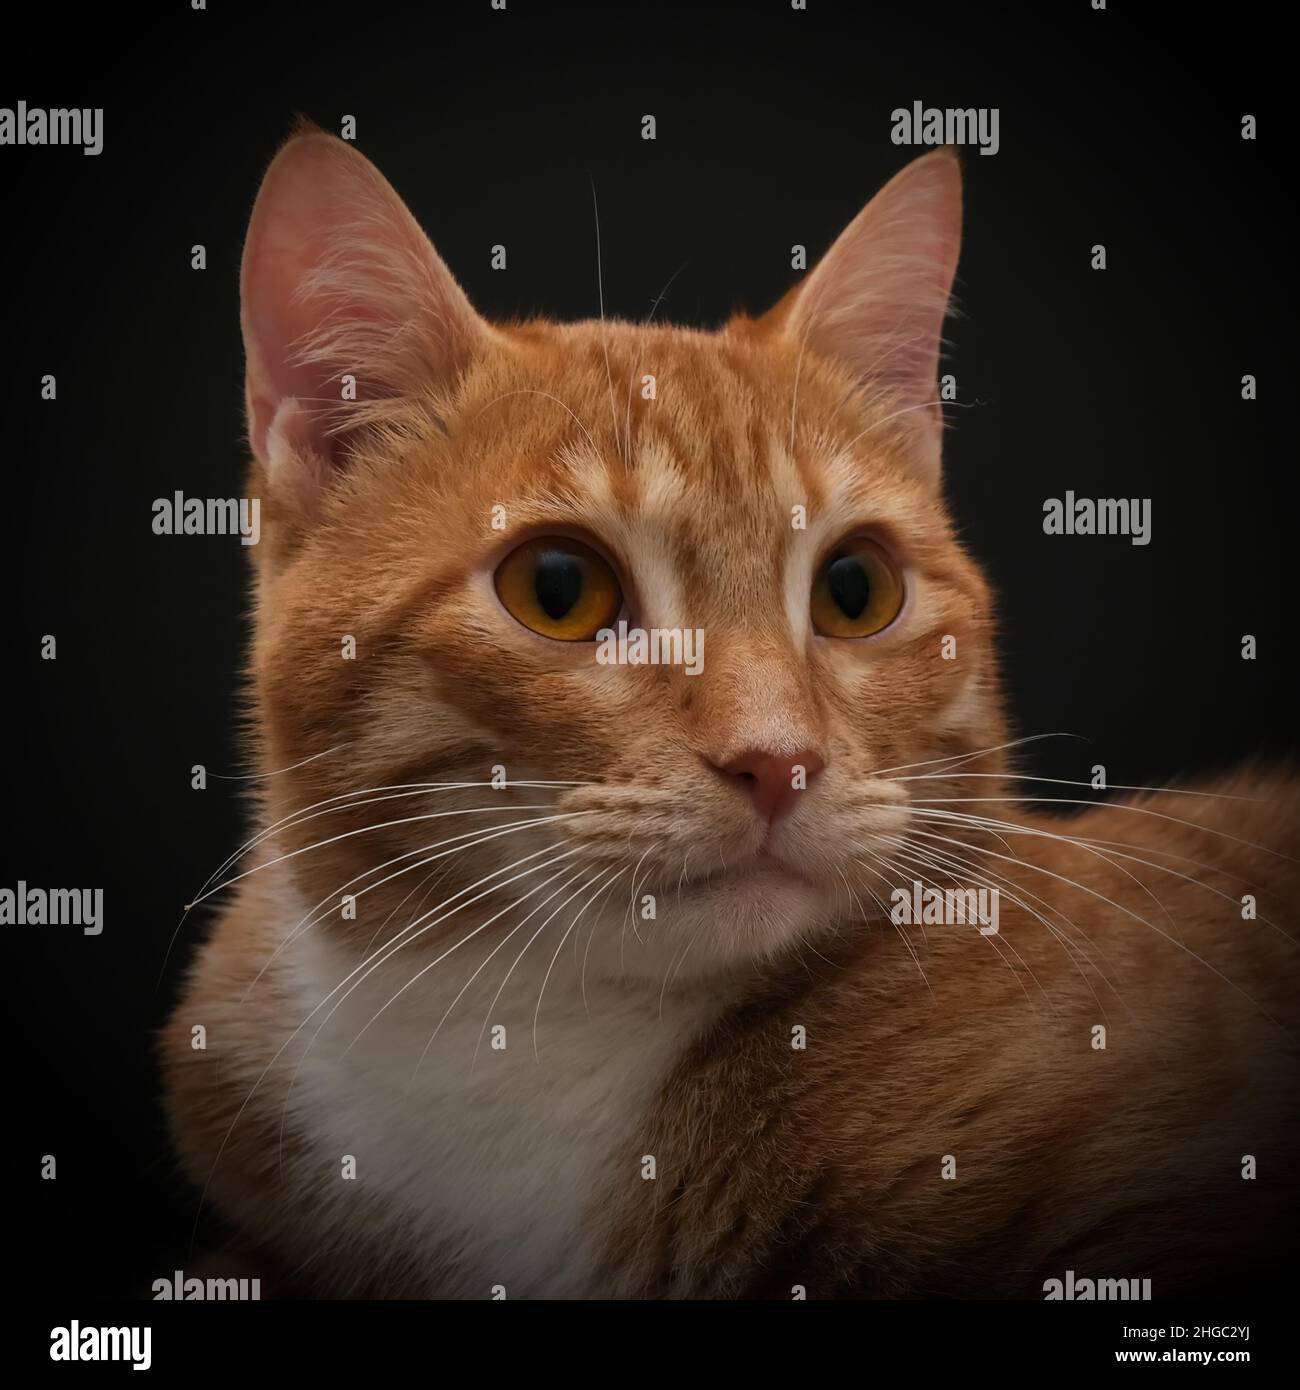 Portrait of young honorable arab ginger tabby cat close up on black background,front view.Pets. Stock Photo